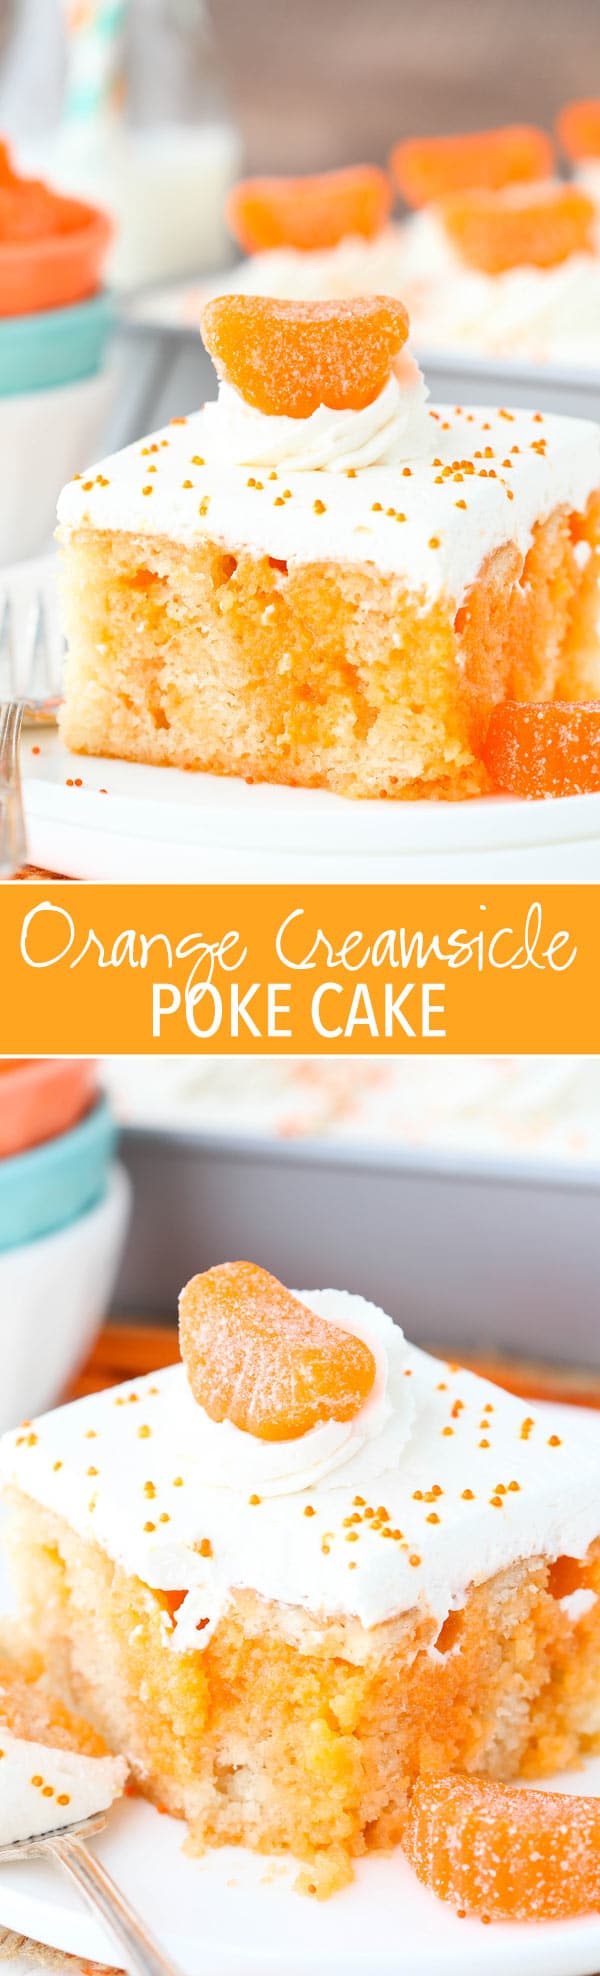 Orange Creamsicle Poke Cake - a moist, from-scratch vanilla cake soaked with orange JELLO and topped with whipped cream! 